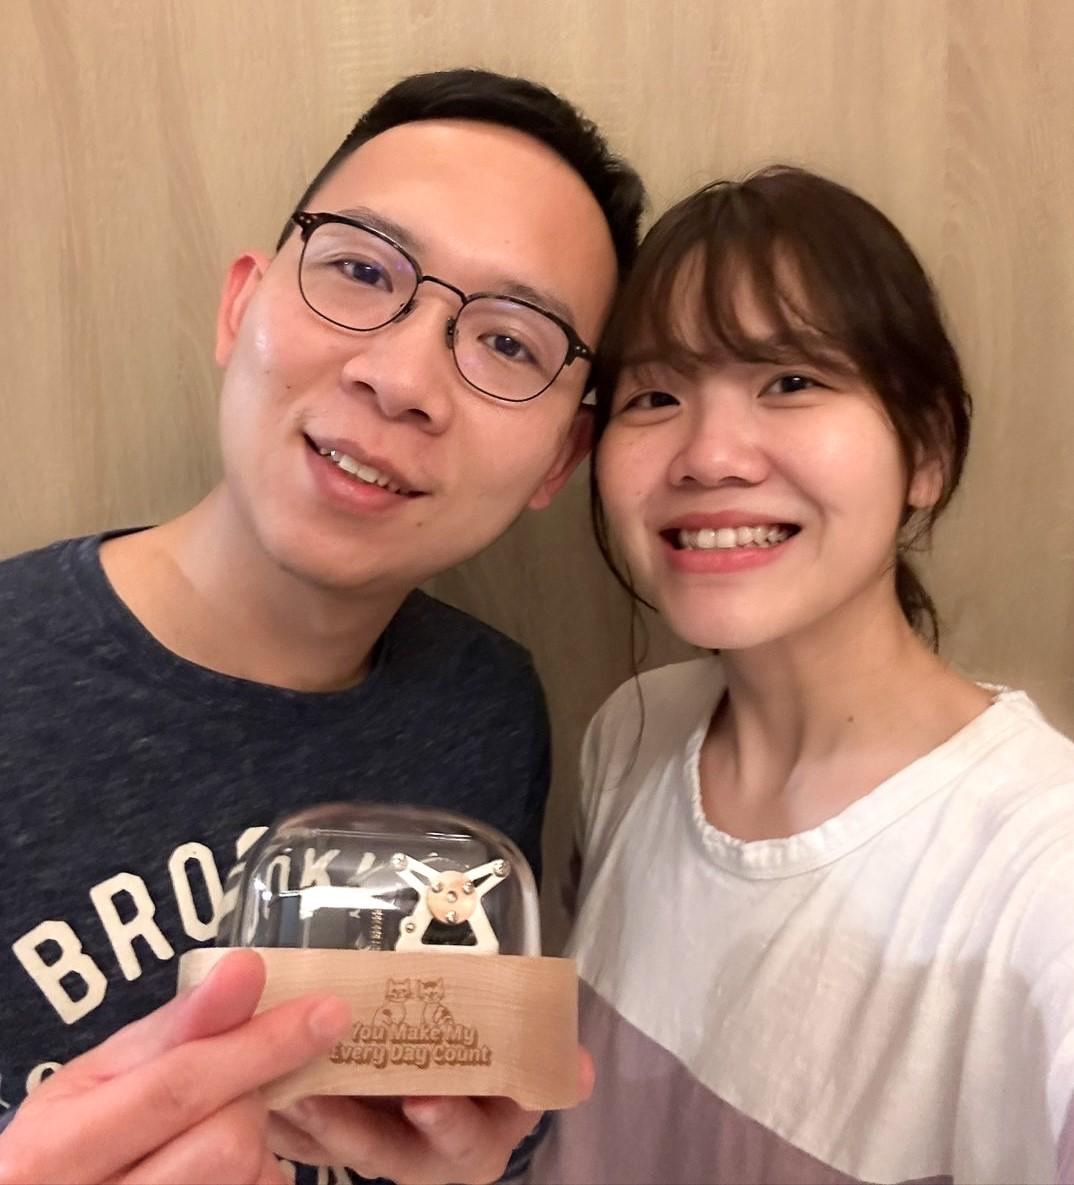 Joy and her hushand and their customized music box (Muro Box) with special engraving design and their special love songs.